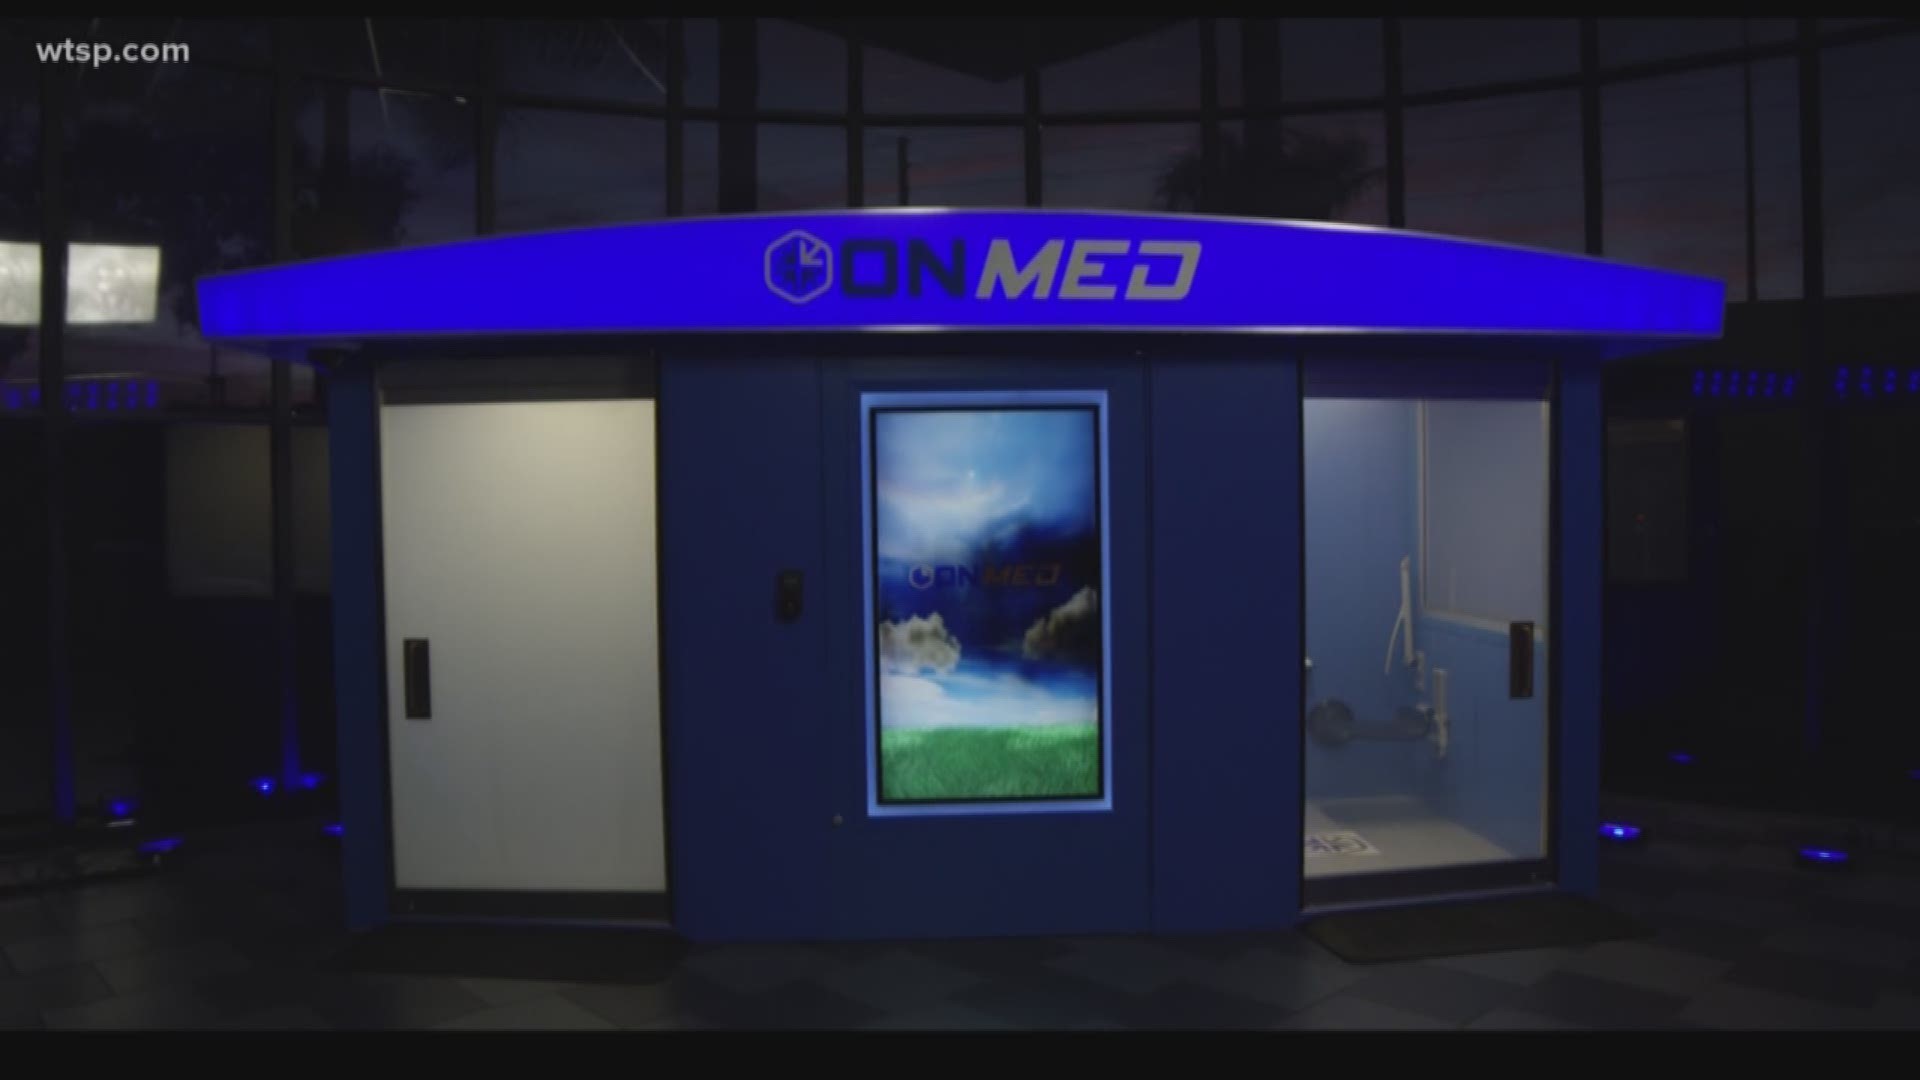 The virtual hospital booth dispenses medicene and could take the place of your doctor.